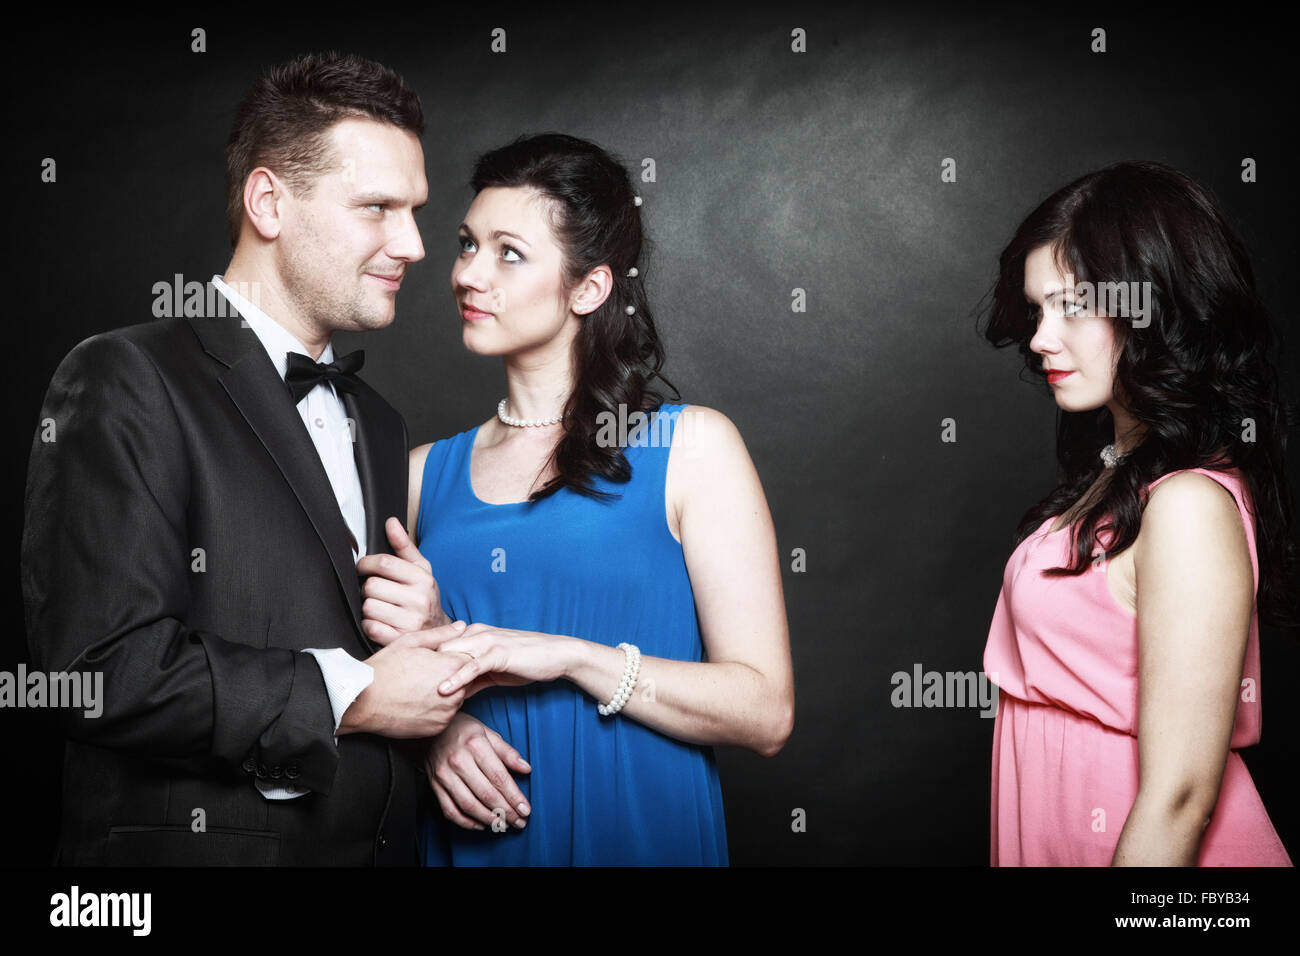 marital infidelity concept. Love triangle passion hate Stock Photo